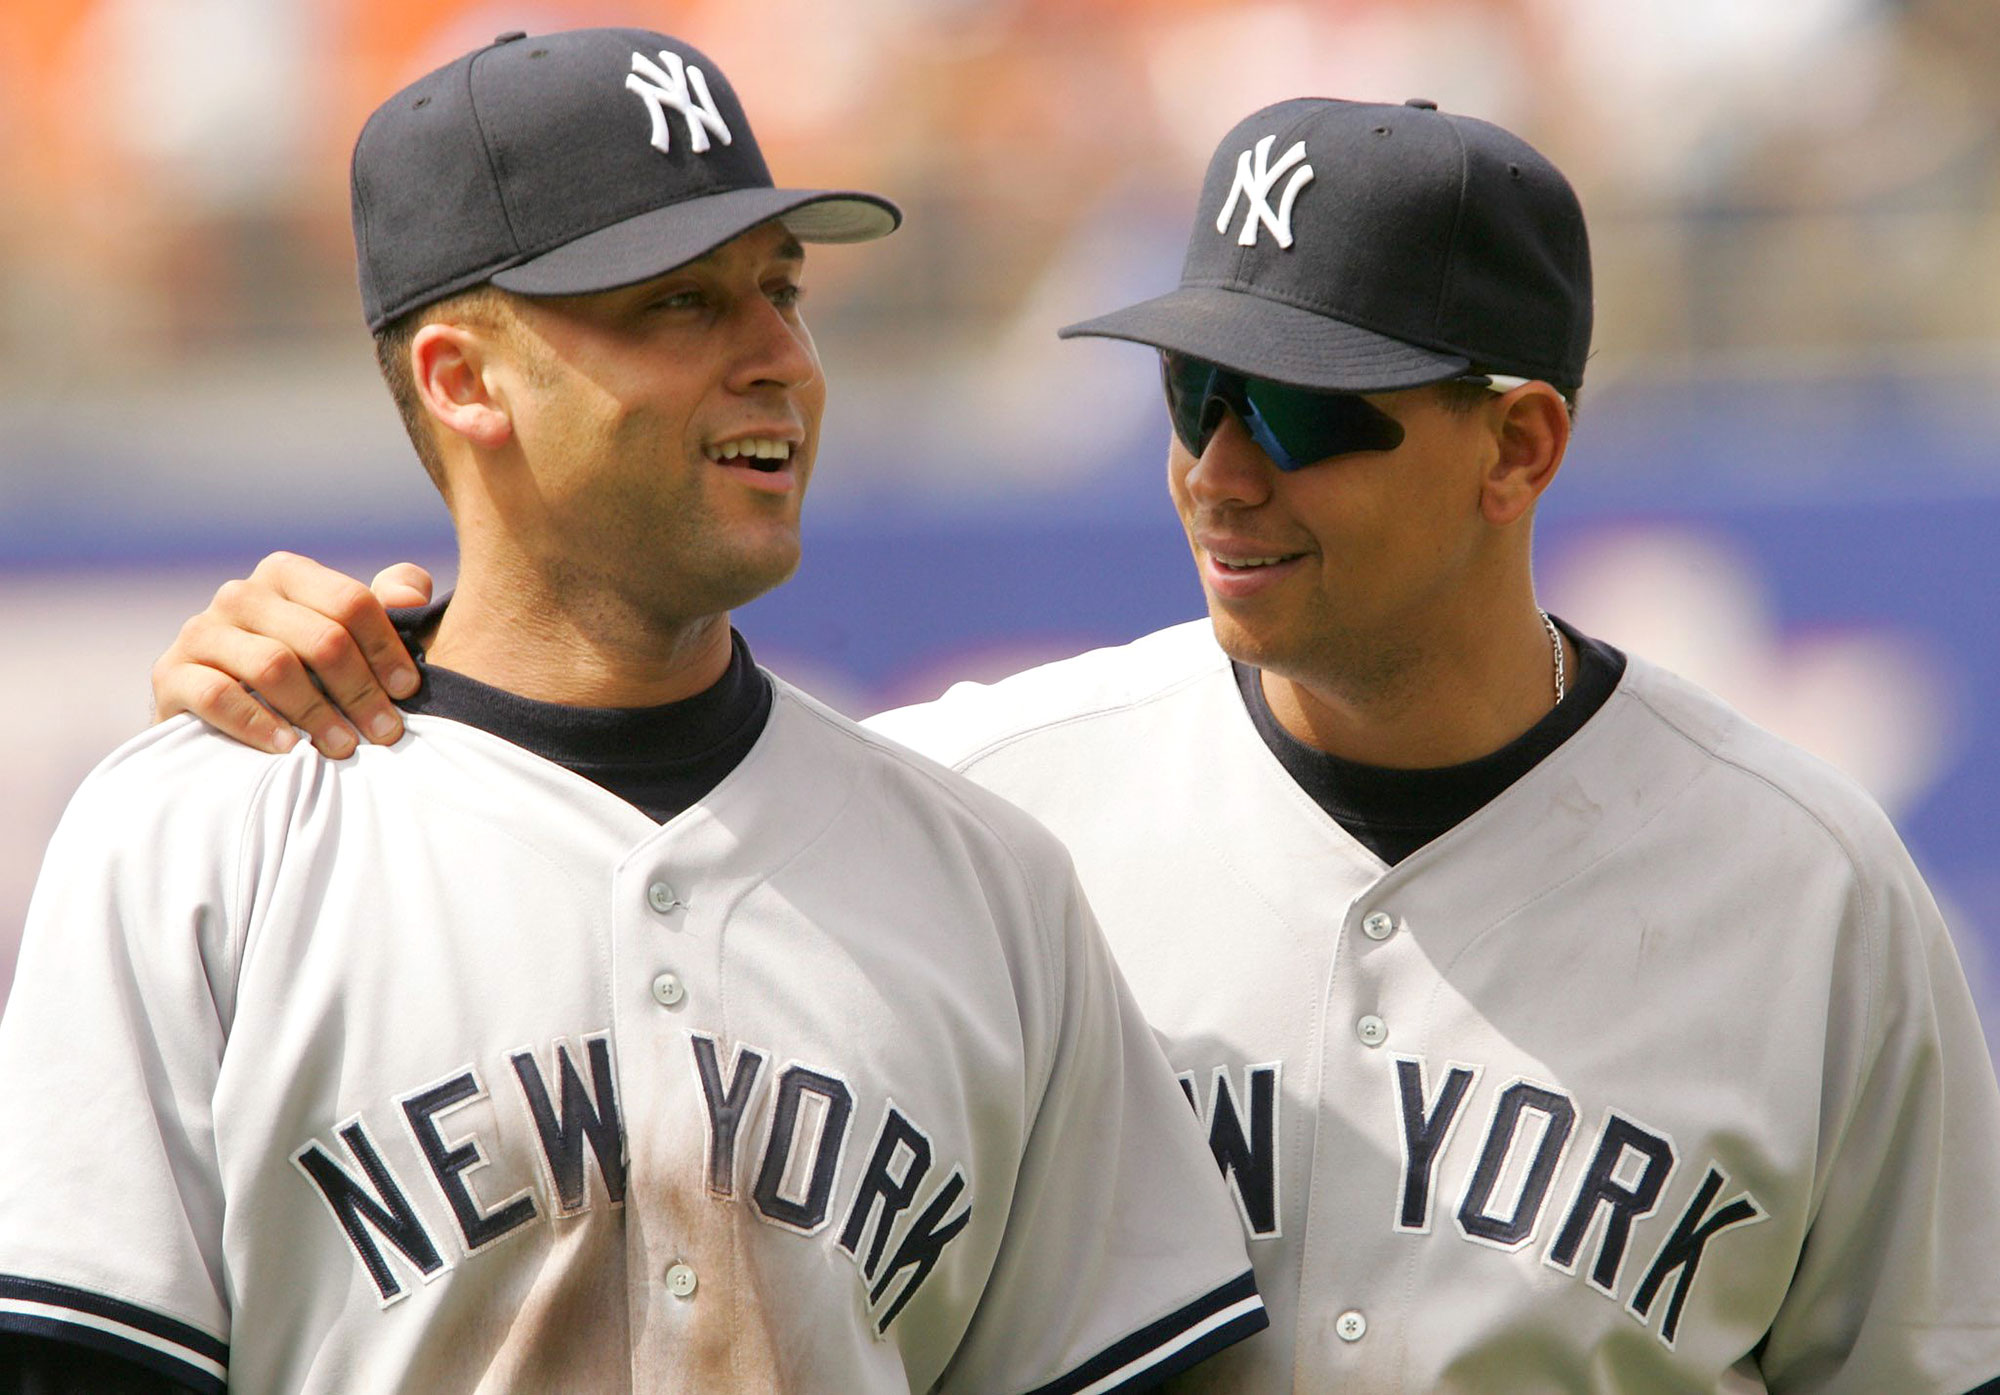 Derek Jeter 'right place, right time' even at Hall of Fame